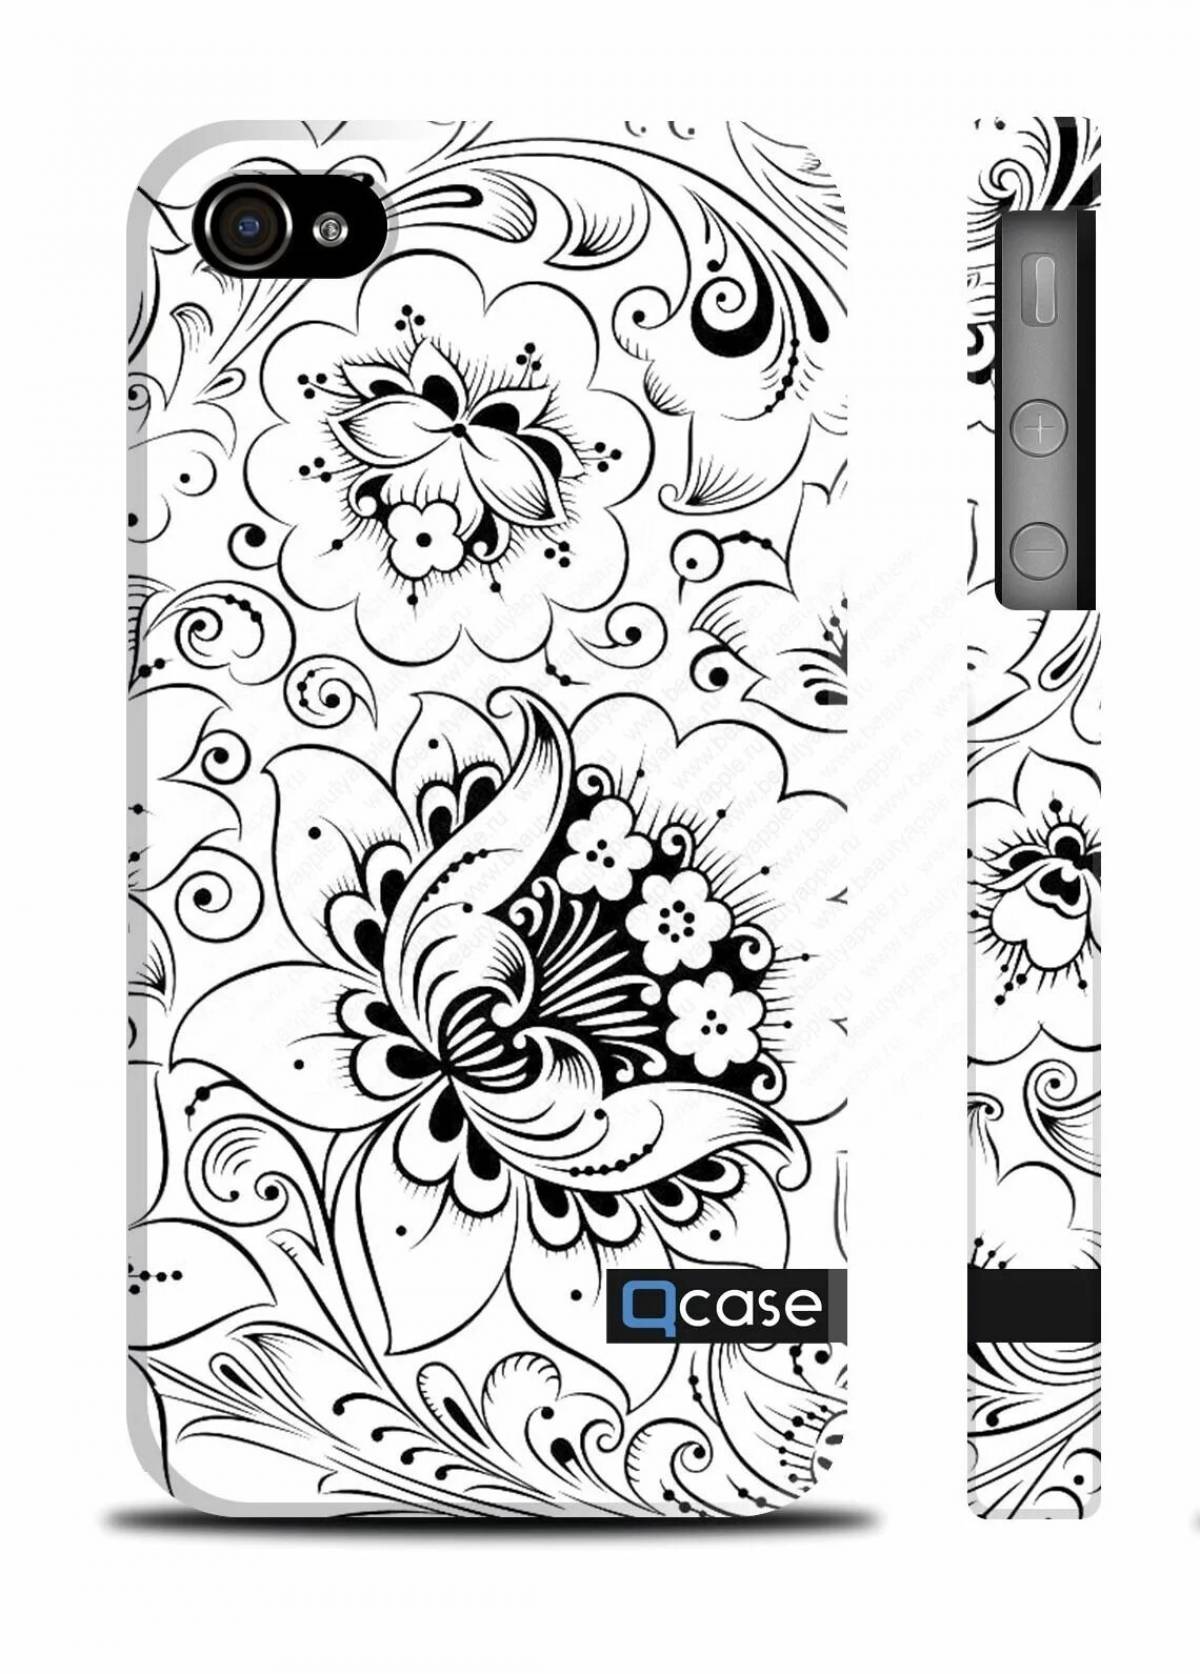 Coloured wonderful case for iphone coloring